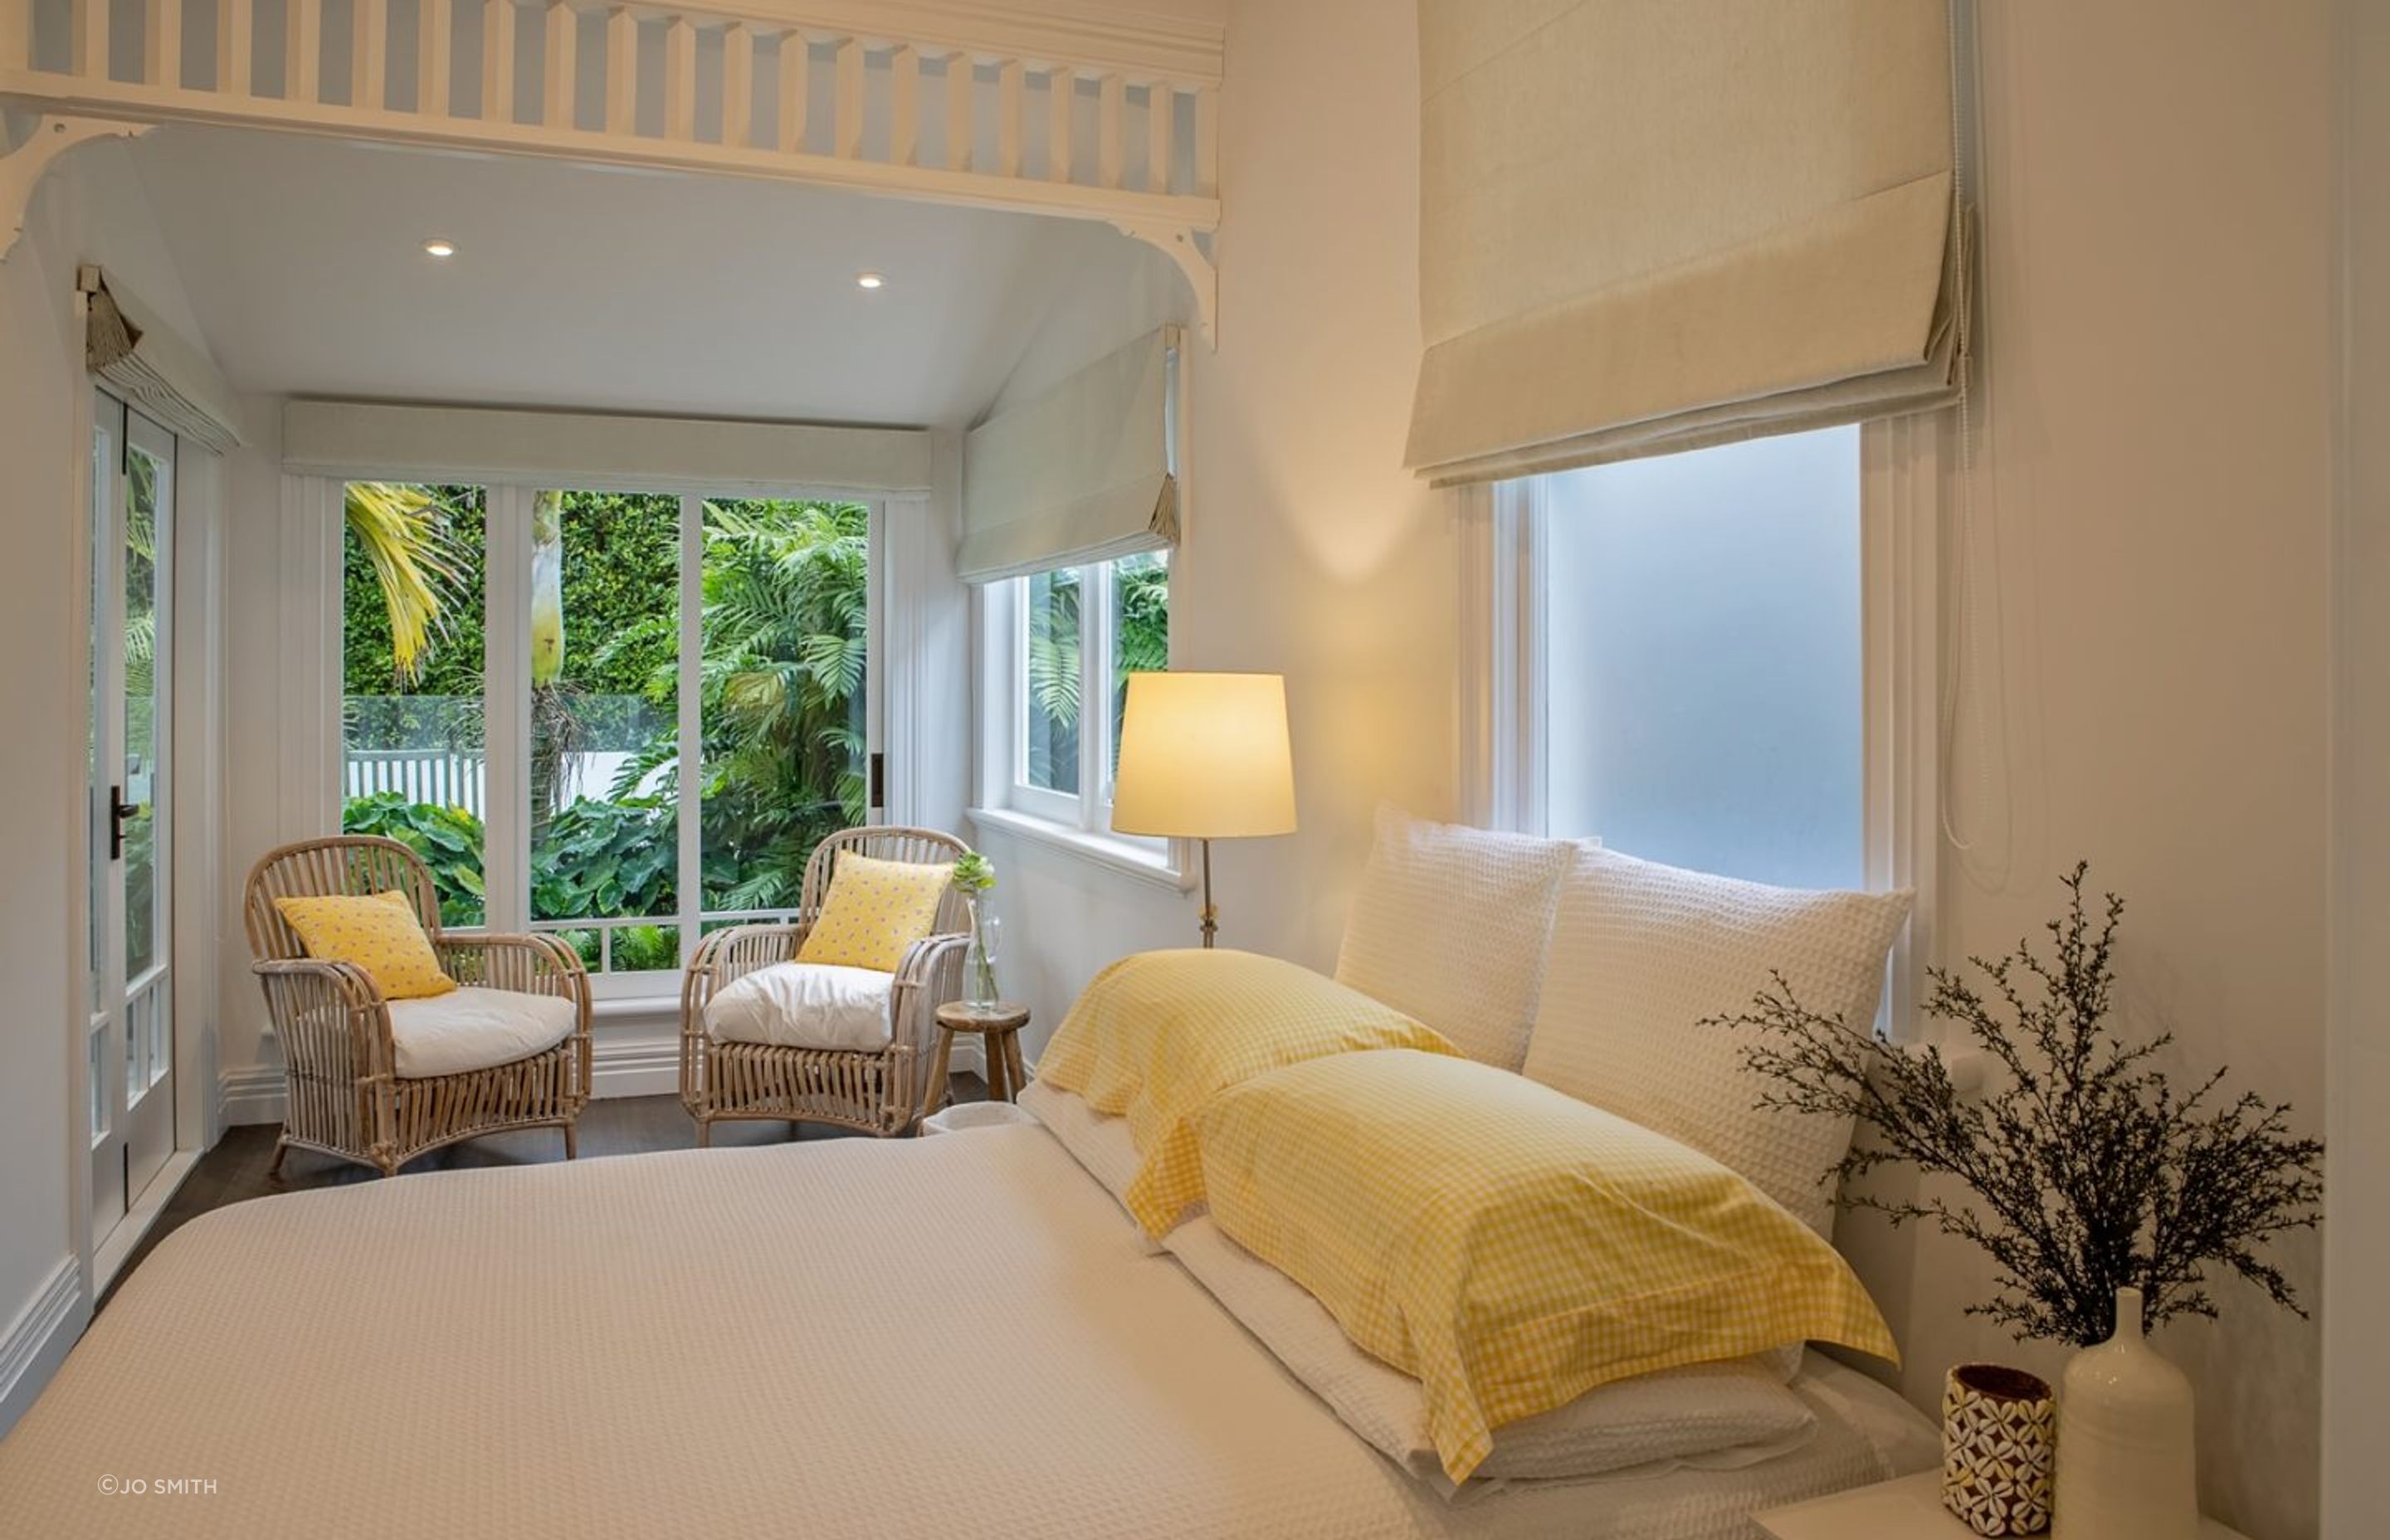 One of the bedrooms has French doors leading onto the verandah.